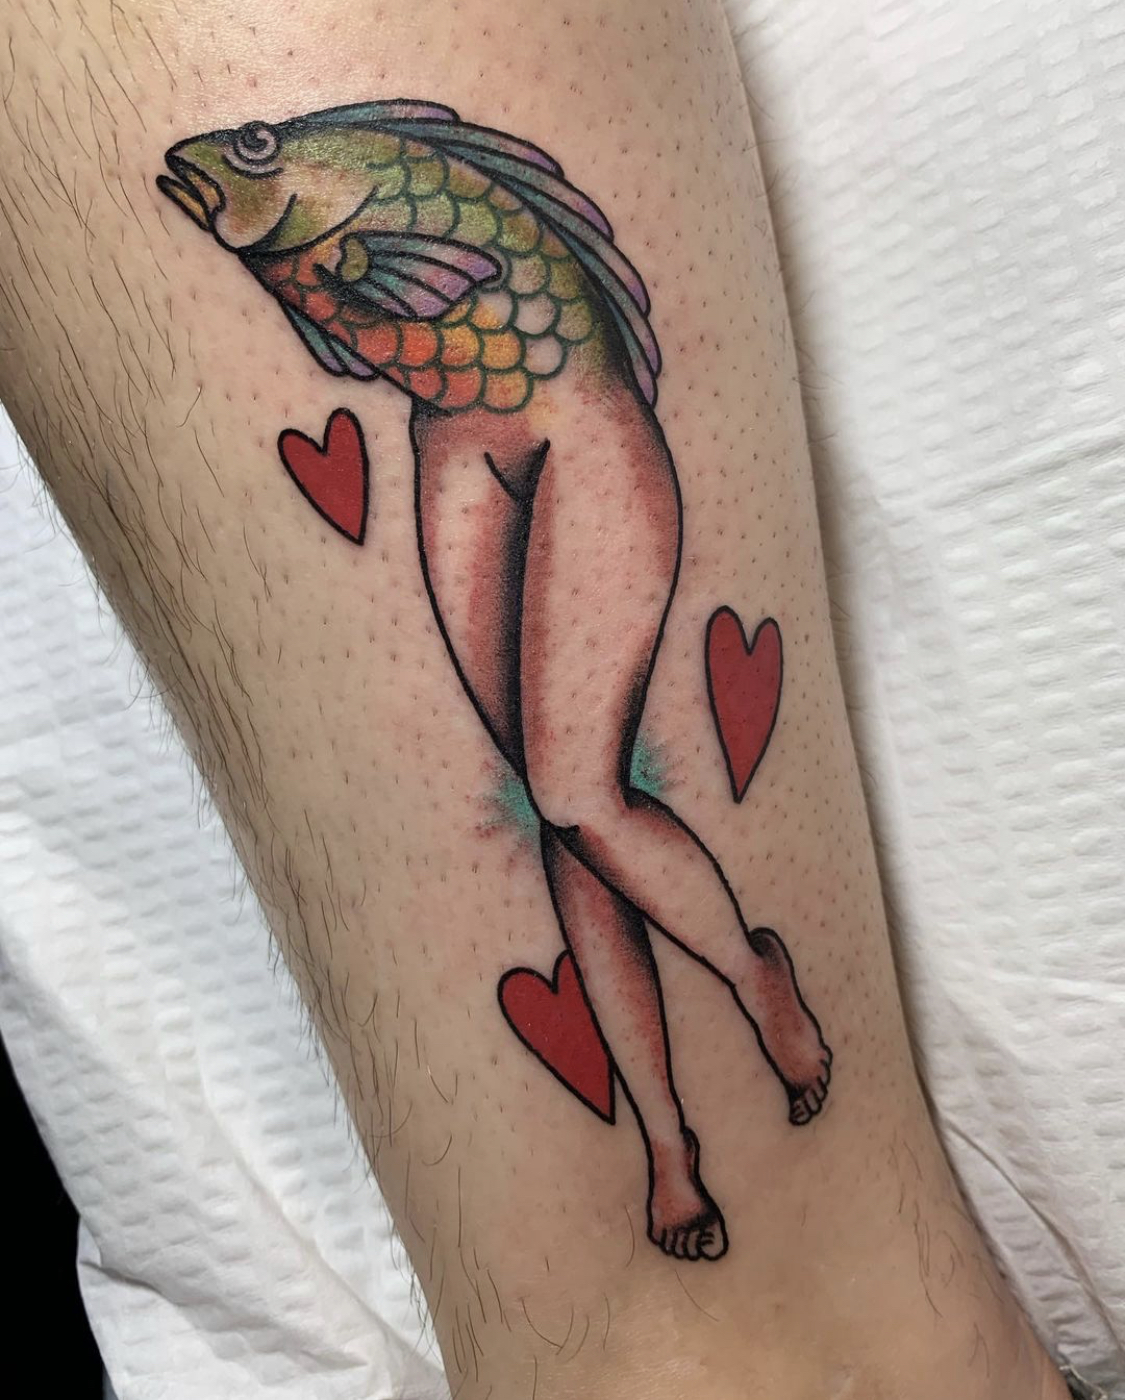 Hearts surround a mermaid with the top half of a fish and the bottom half of a human.